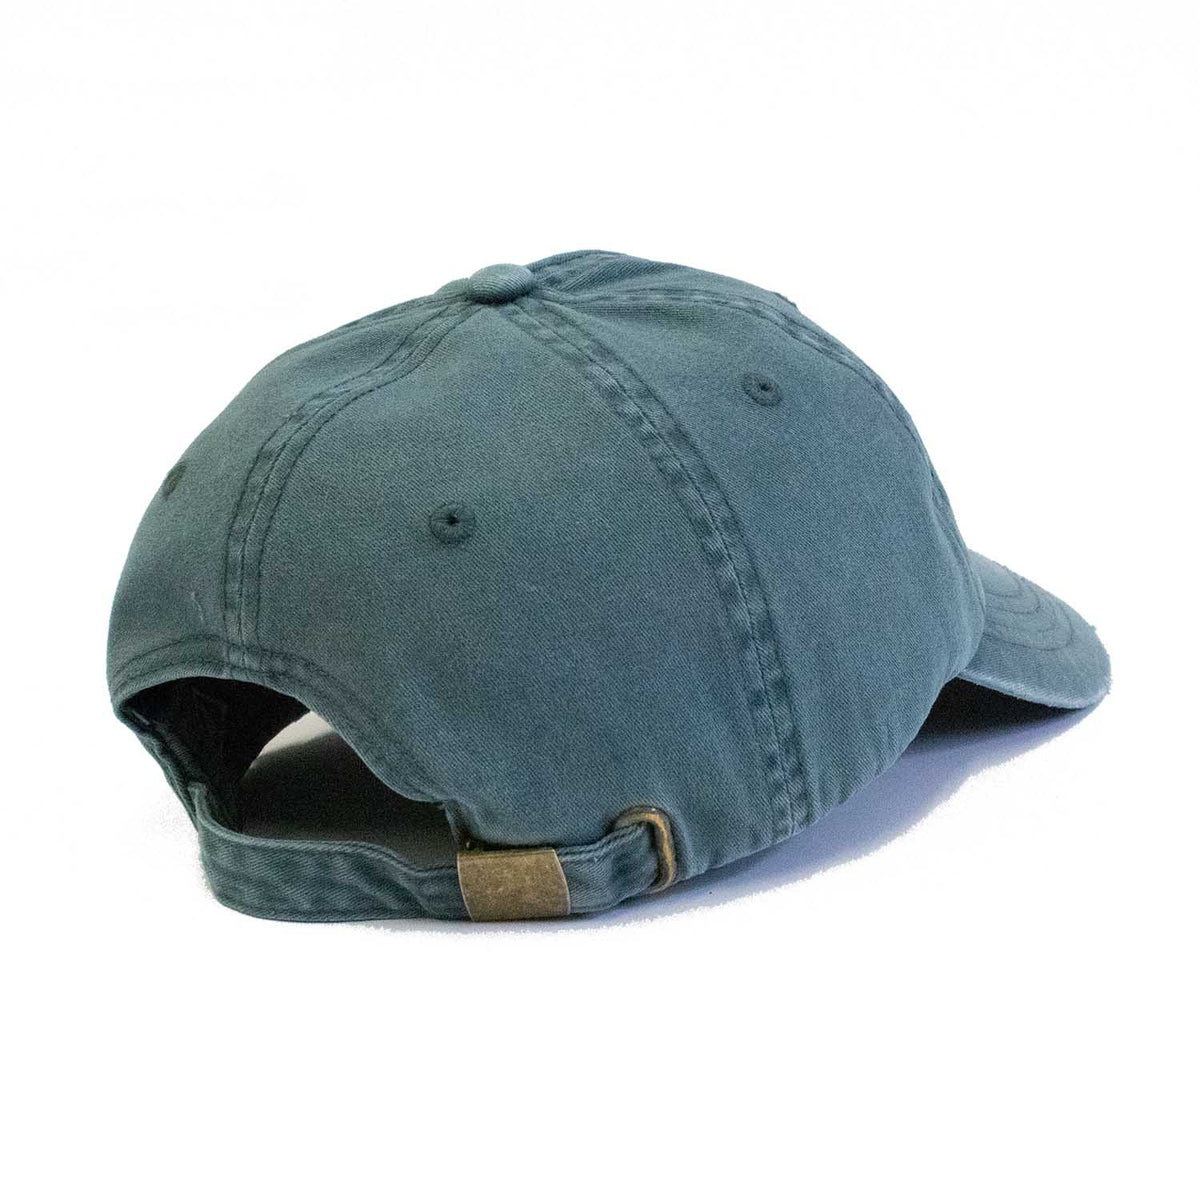 Solvem Probler 6 panel low profile embroidered Cap with distressed bil ...